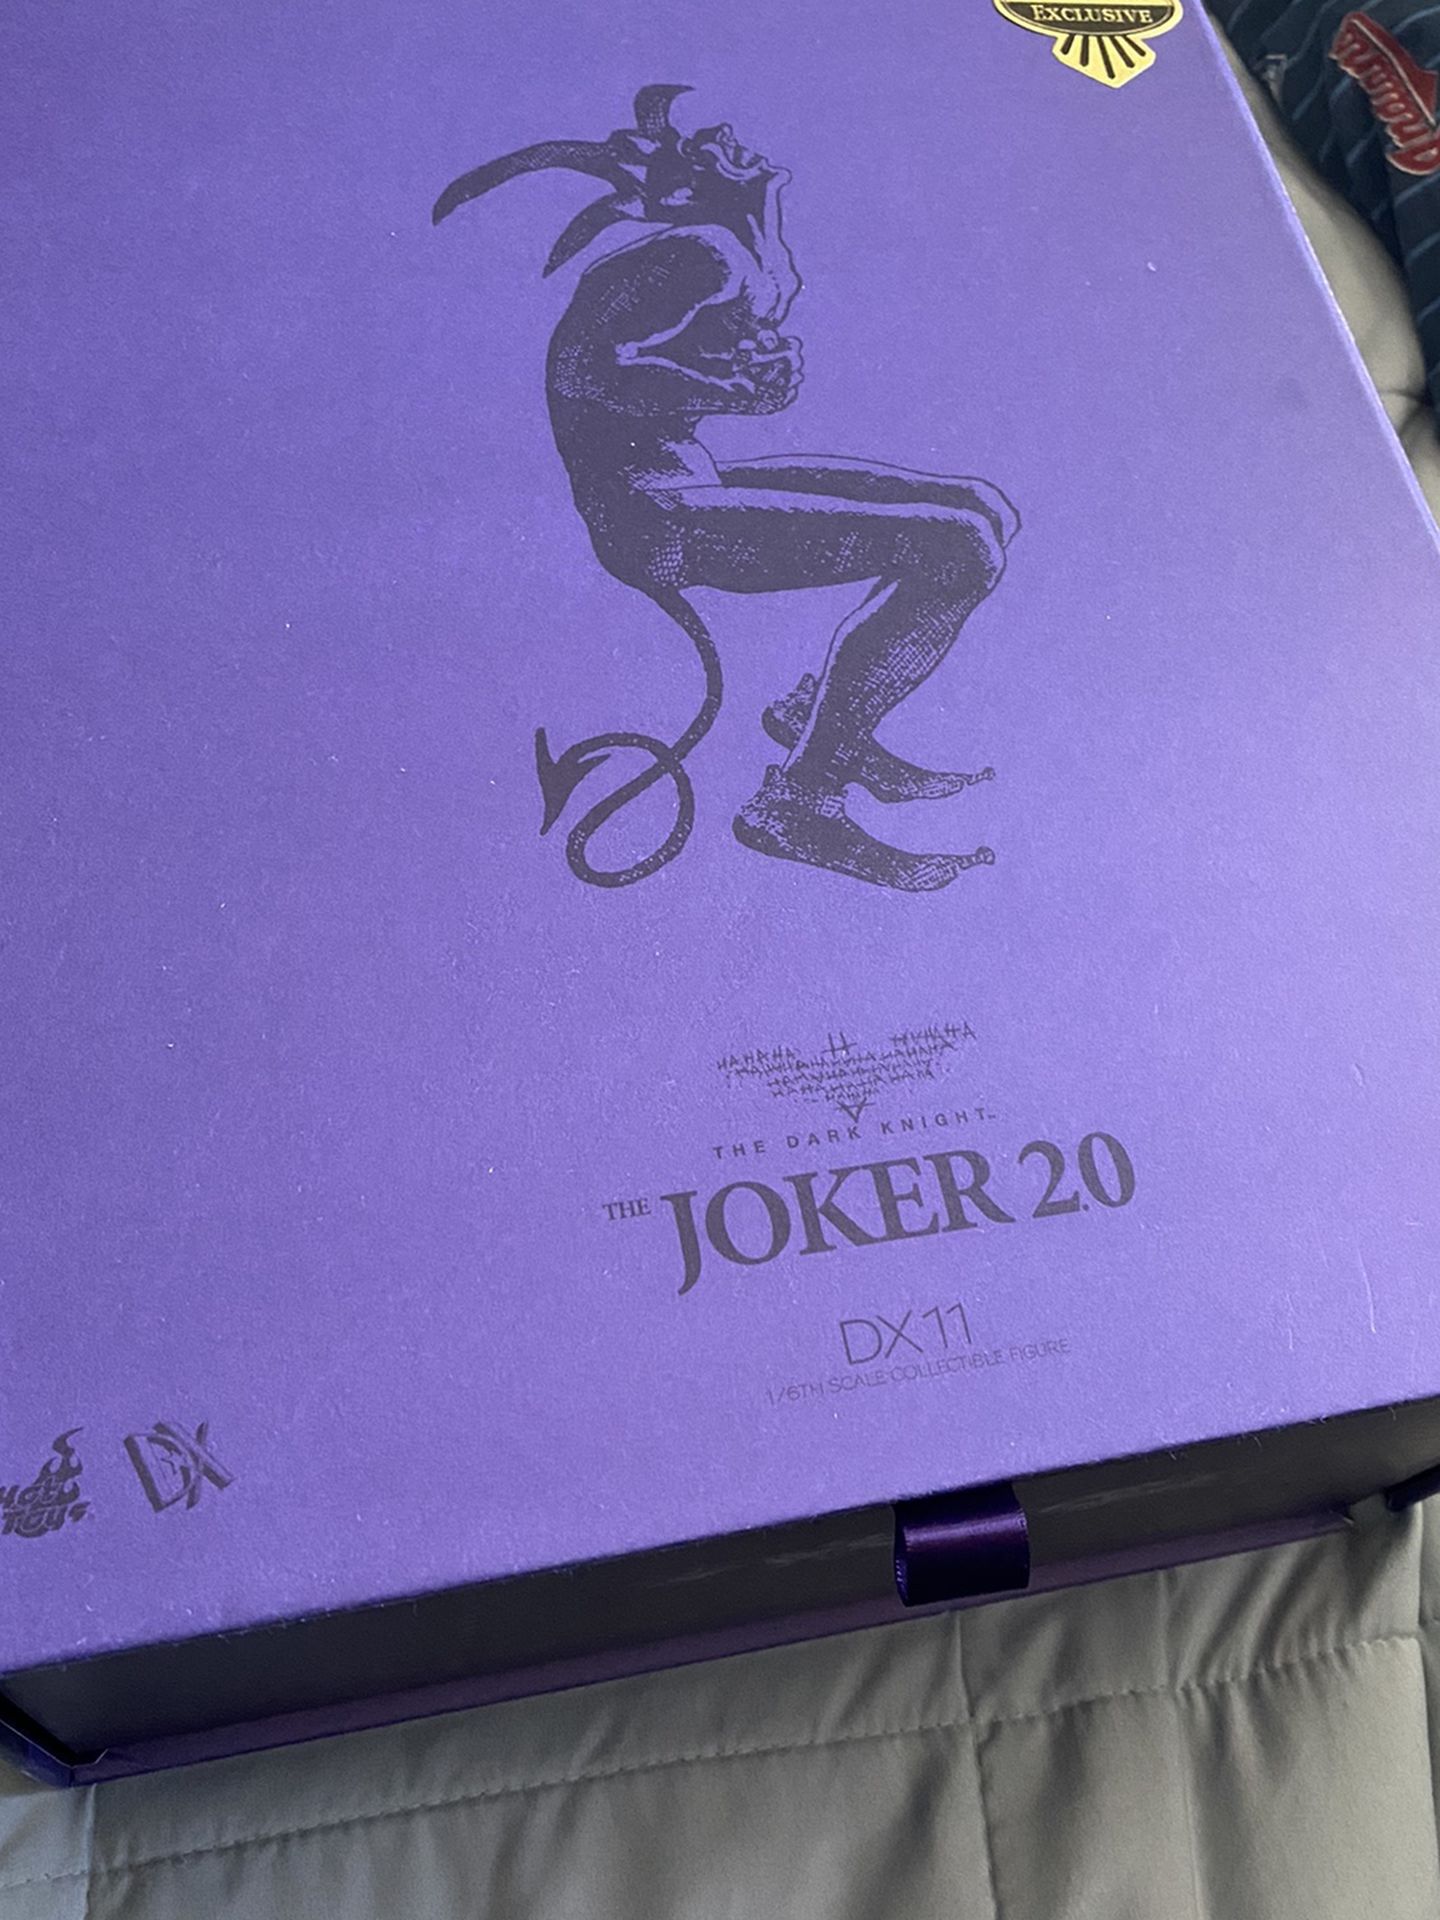 Hot Toys The Dark Knight DX11 The Joker 1/6 Scale Action Figure Sideshow Exclusive Black Toys Mezco Mafex Figuarts Figma DC Comics